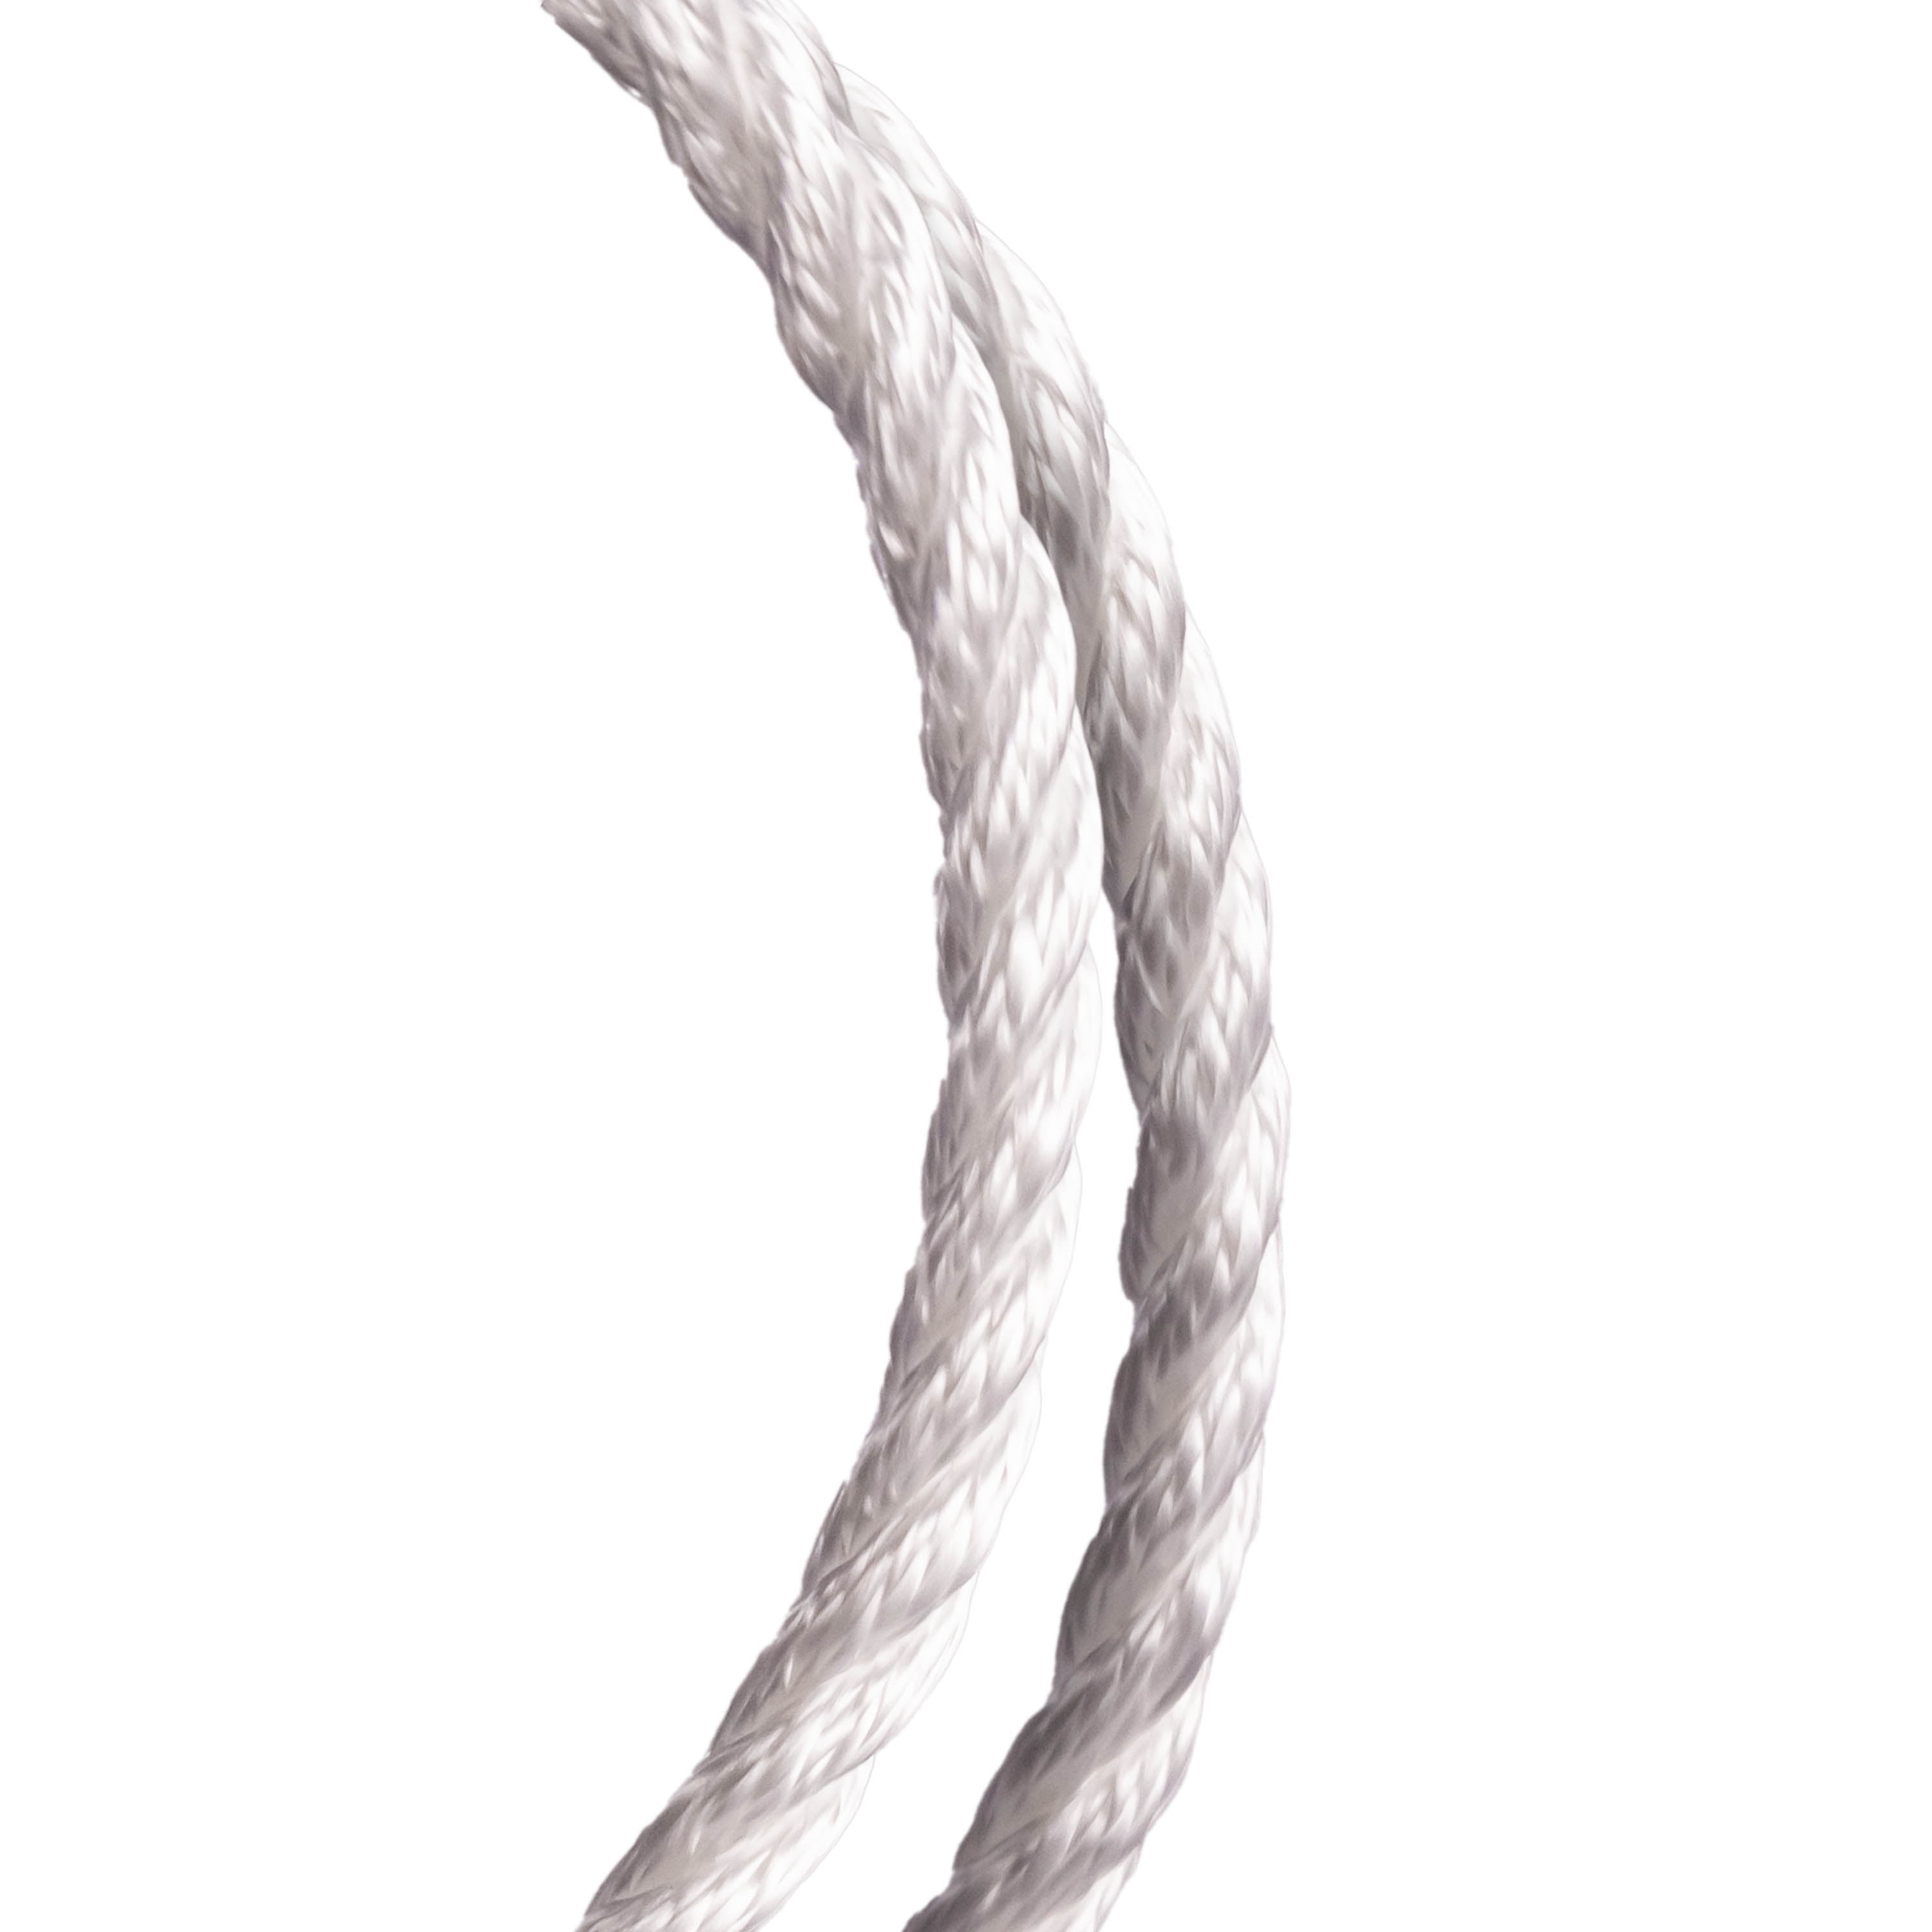 Hyper Tough Item# BWSBP850W-P-HT, Polypropylene Solid Braid Rope, Blue and  White, 3/8 x 50', 1 Each